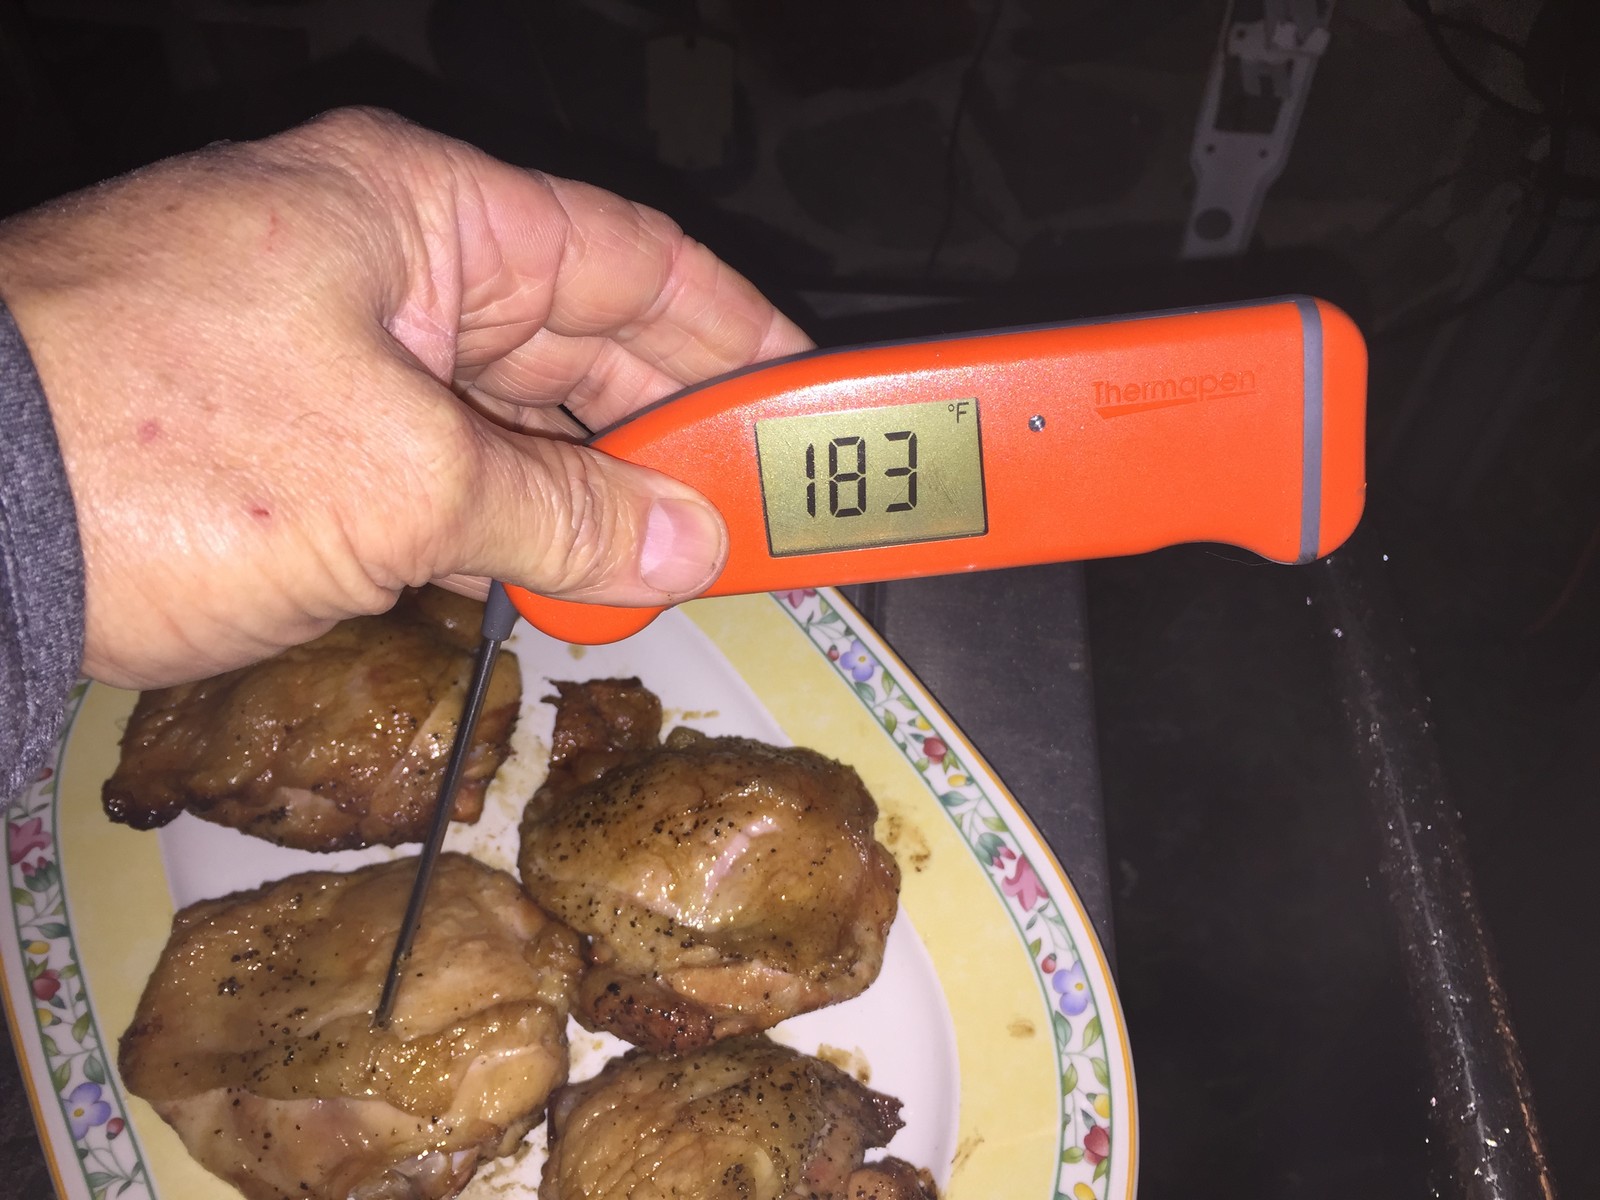 ThermoWorks Thermapen Mk4: This incredible meat thermometer is